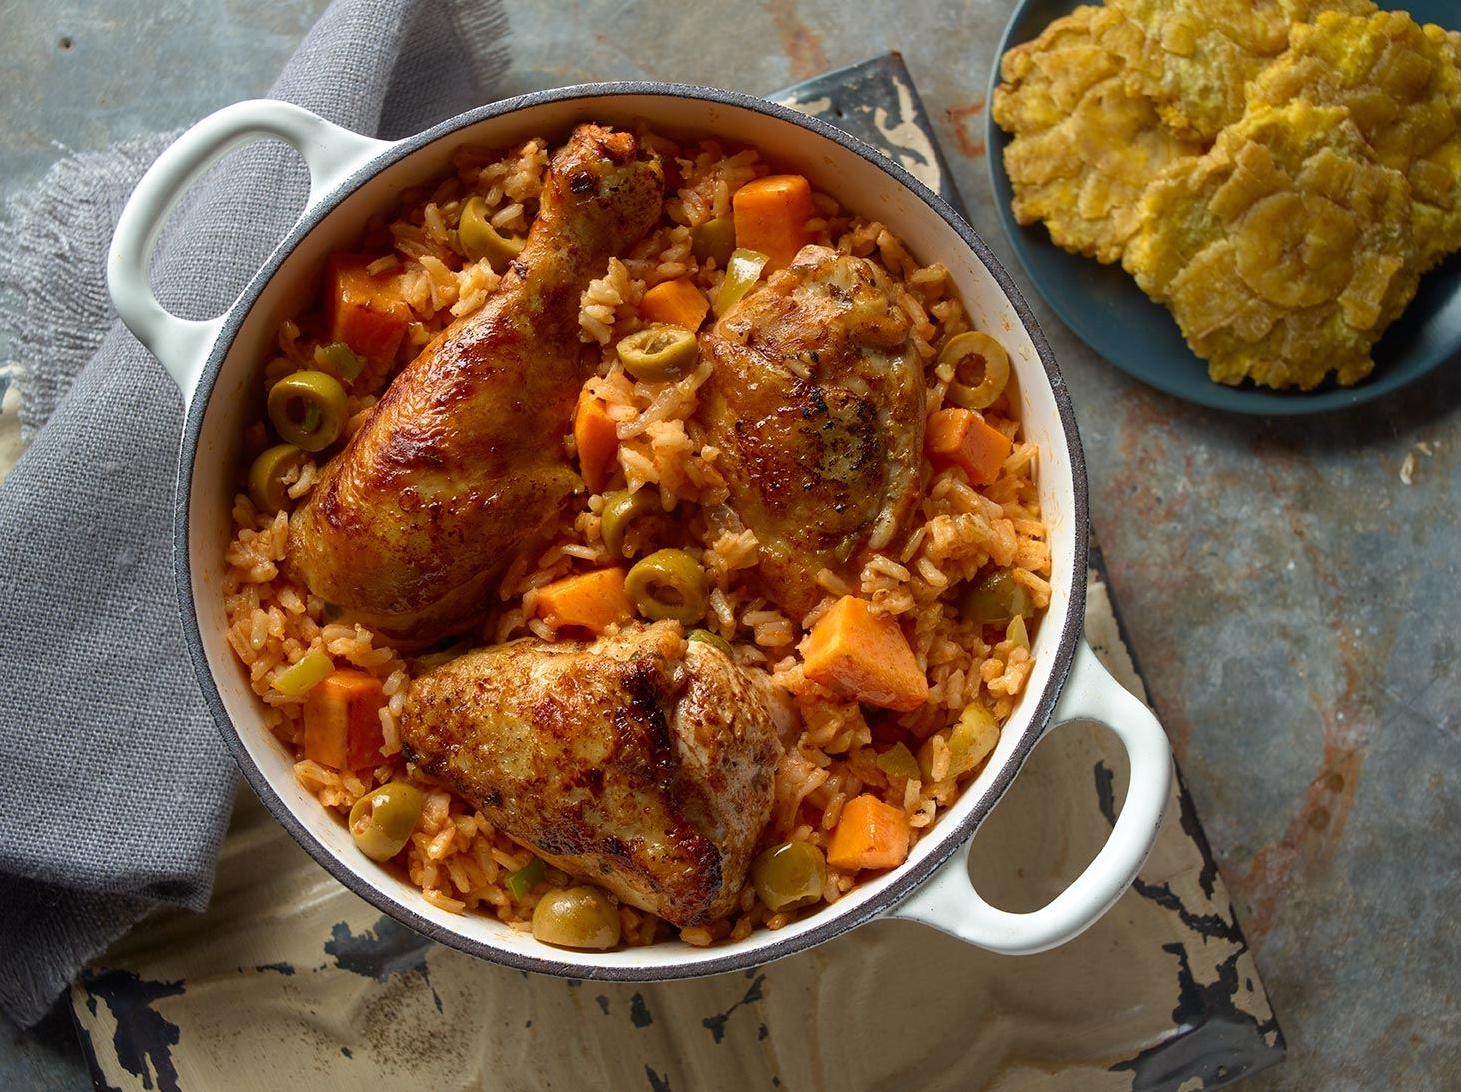  Take your taste buds on a trip to the Caribbean with this delicious Arroz Con Pollo recipe.